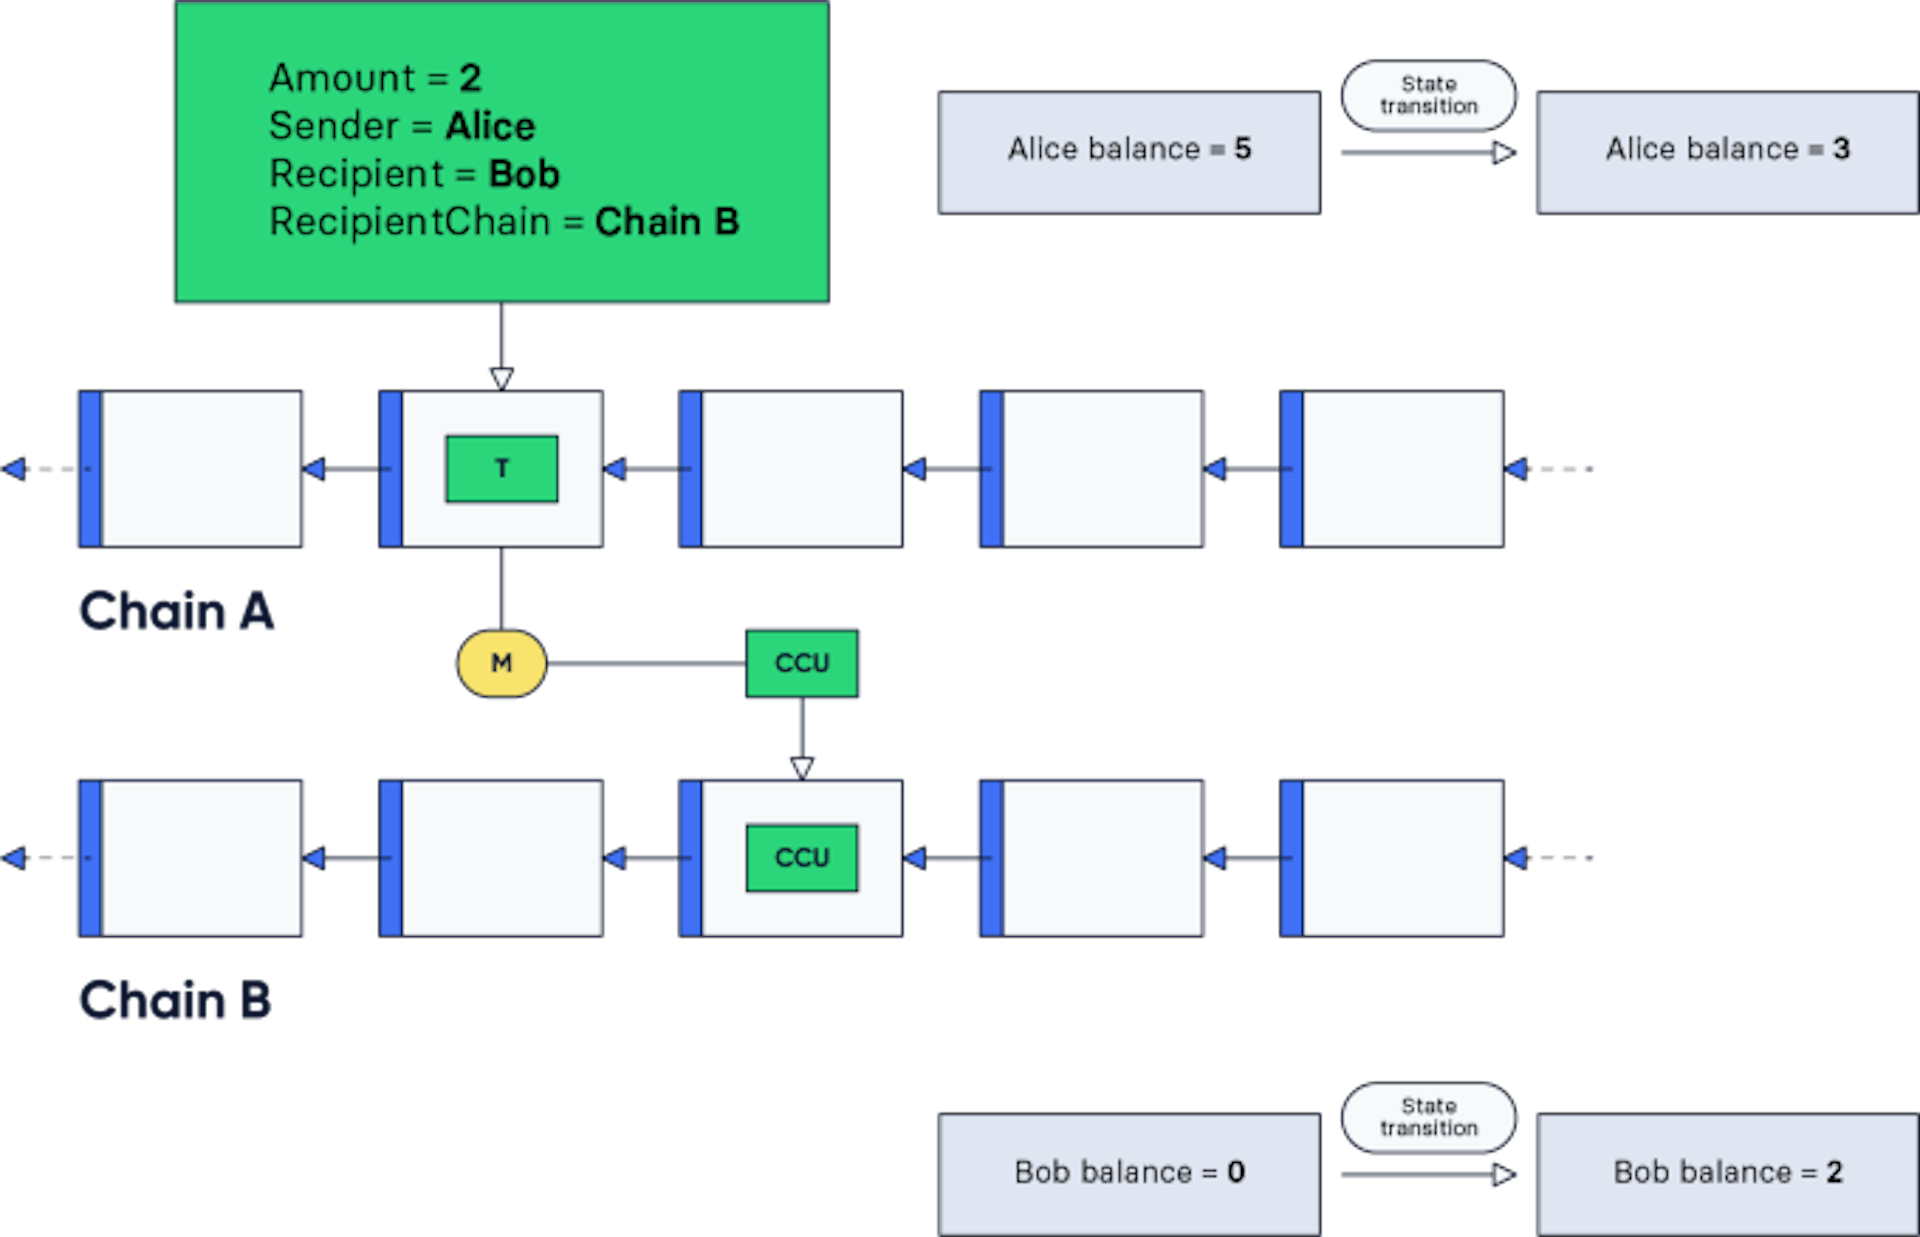 Figure 2: Alice sends 2 LSK to Bob from chain A to chain B. The cross-chain transaction T generates a message M which is included in the cross-chain update CCU. The cross-chain update is included in chain B to induce the state transition that credits Bob with 2 LSK.